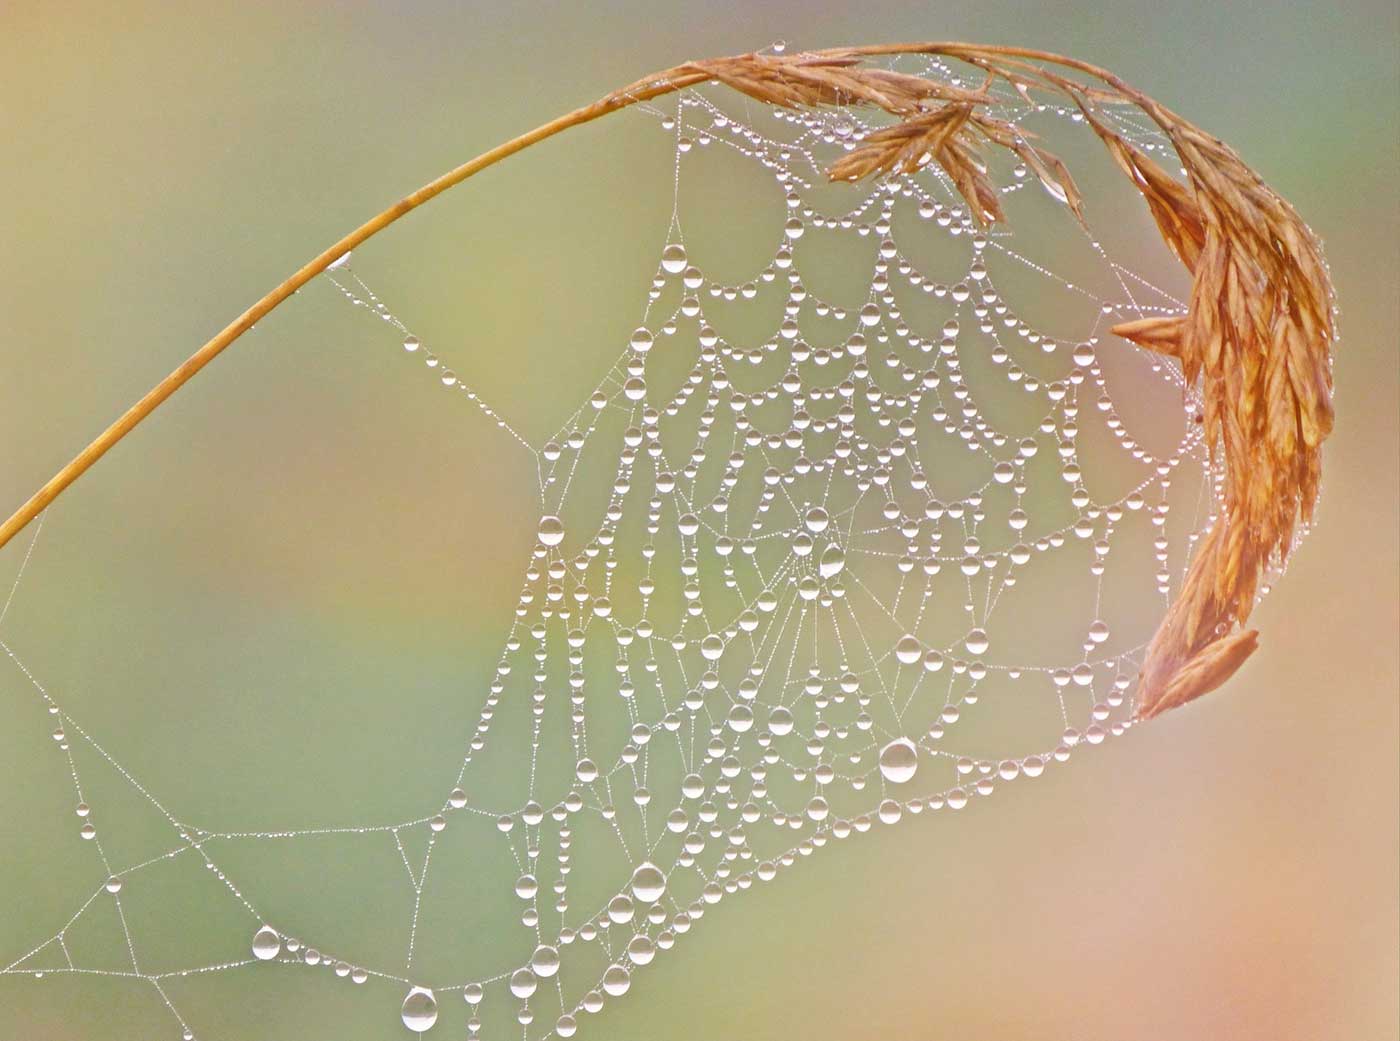 Spider web with drew drops